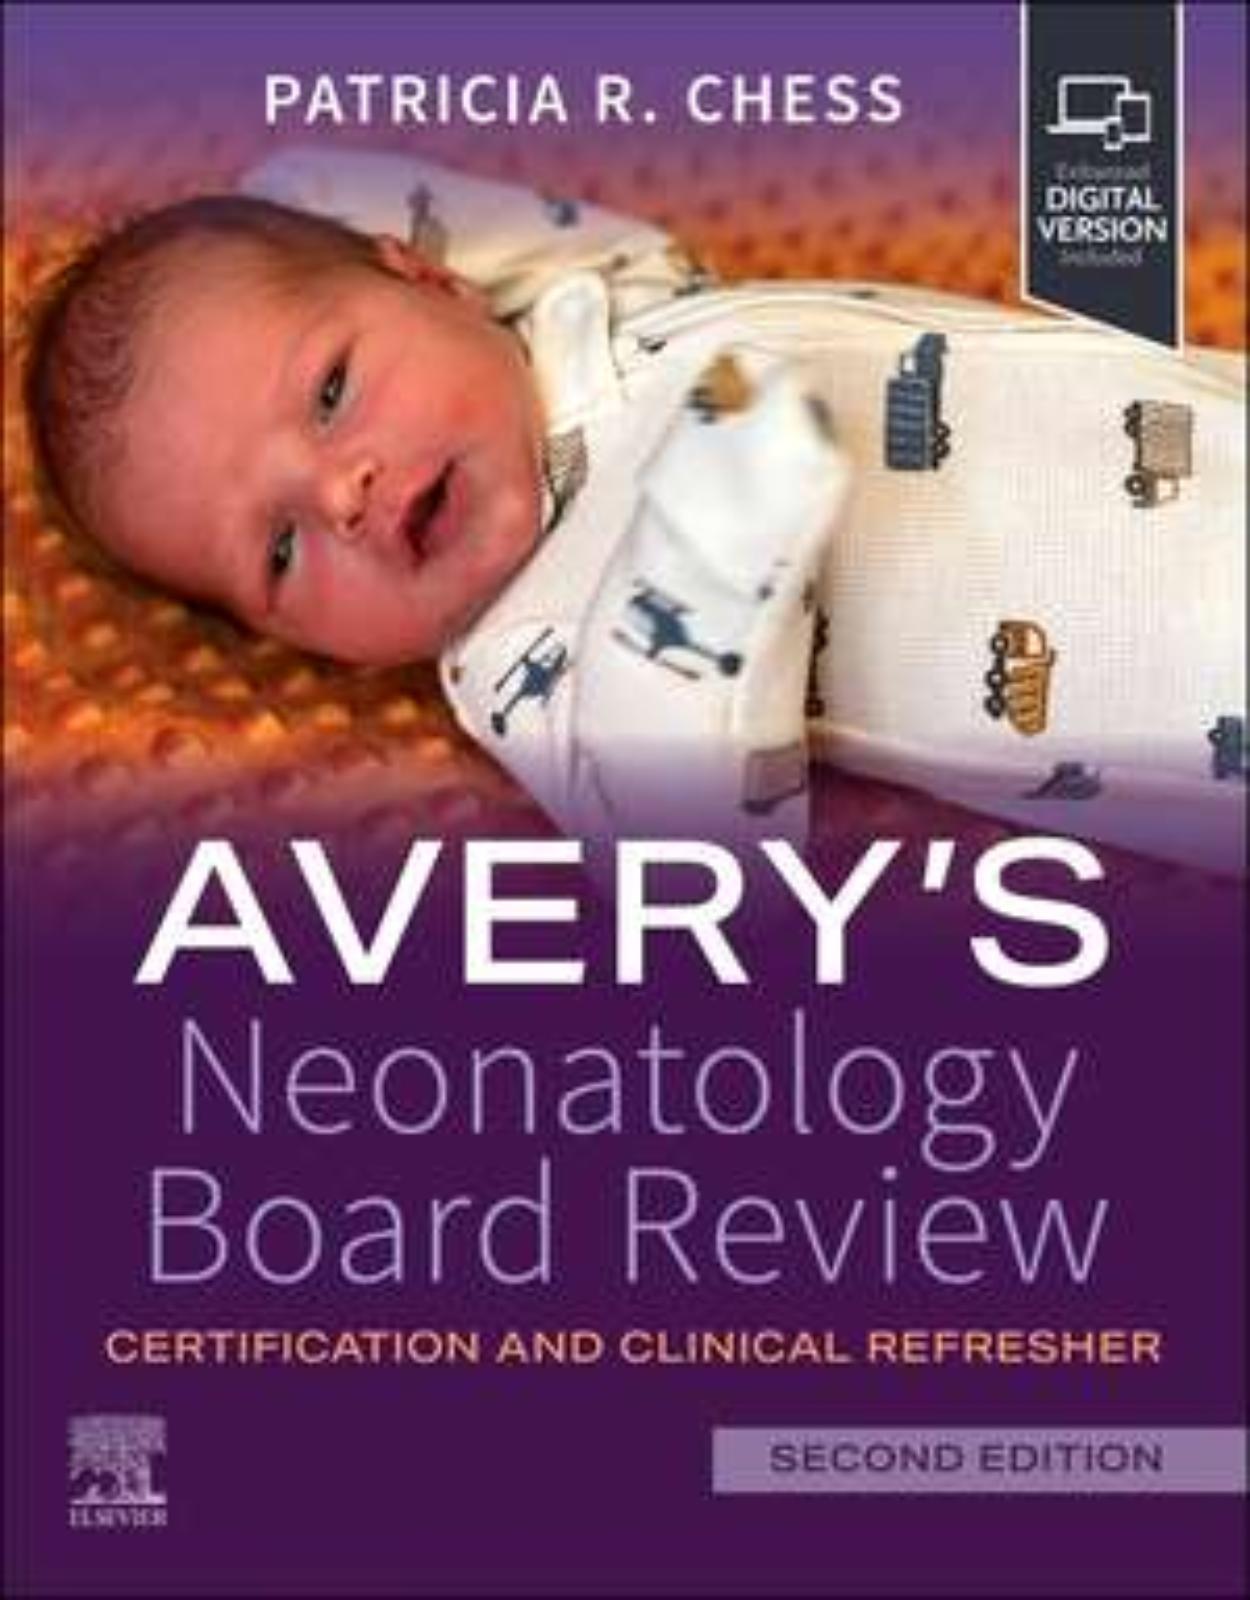 Avery’s Neonatology Board Review: Certification and Clinical Refresher